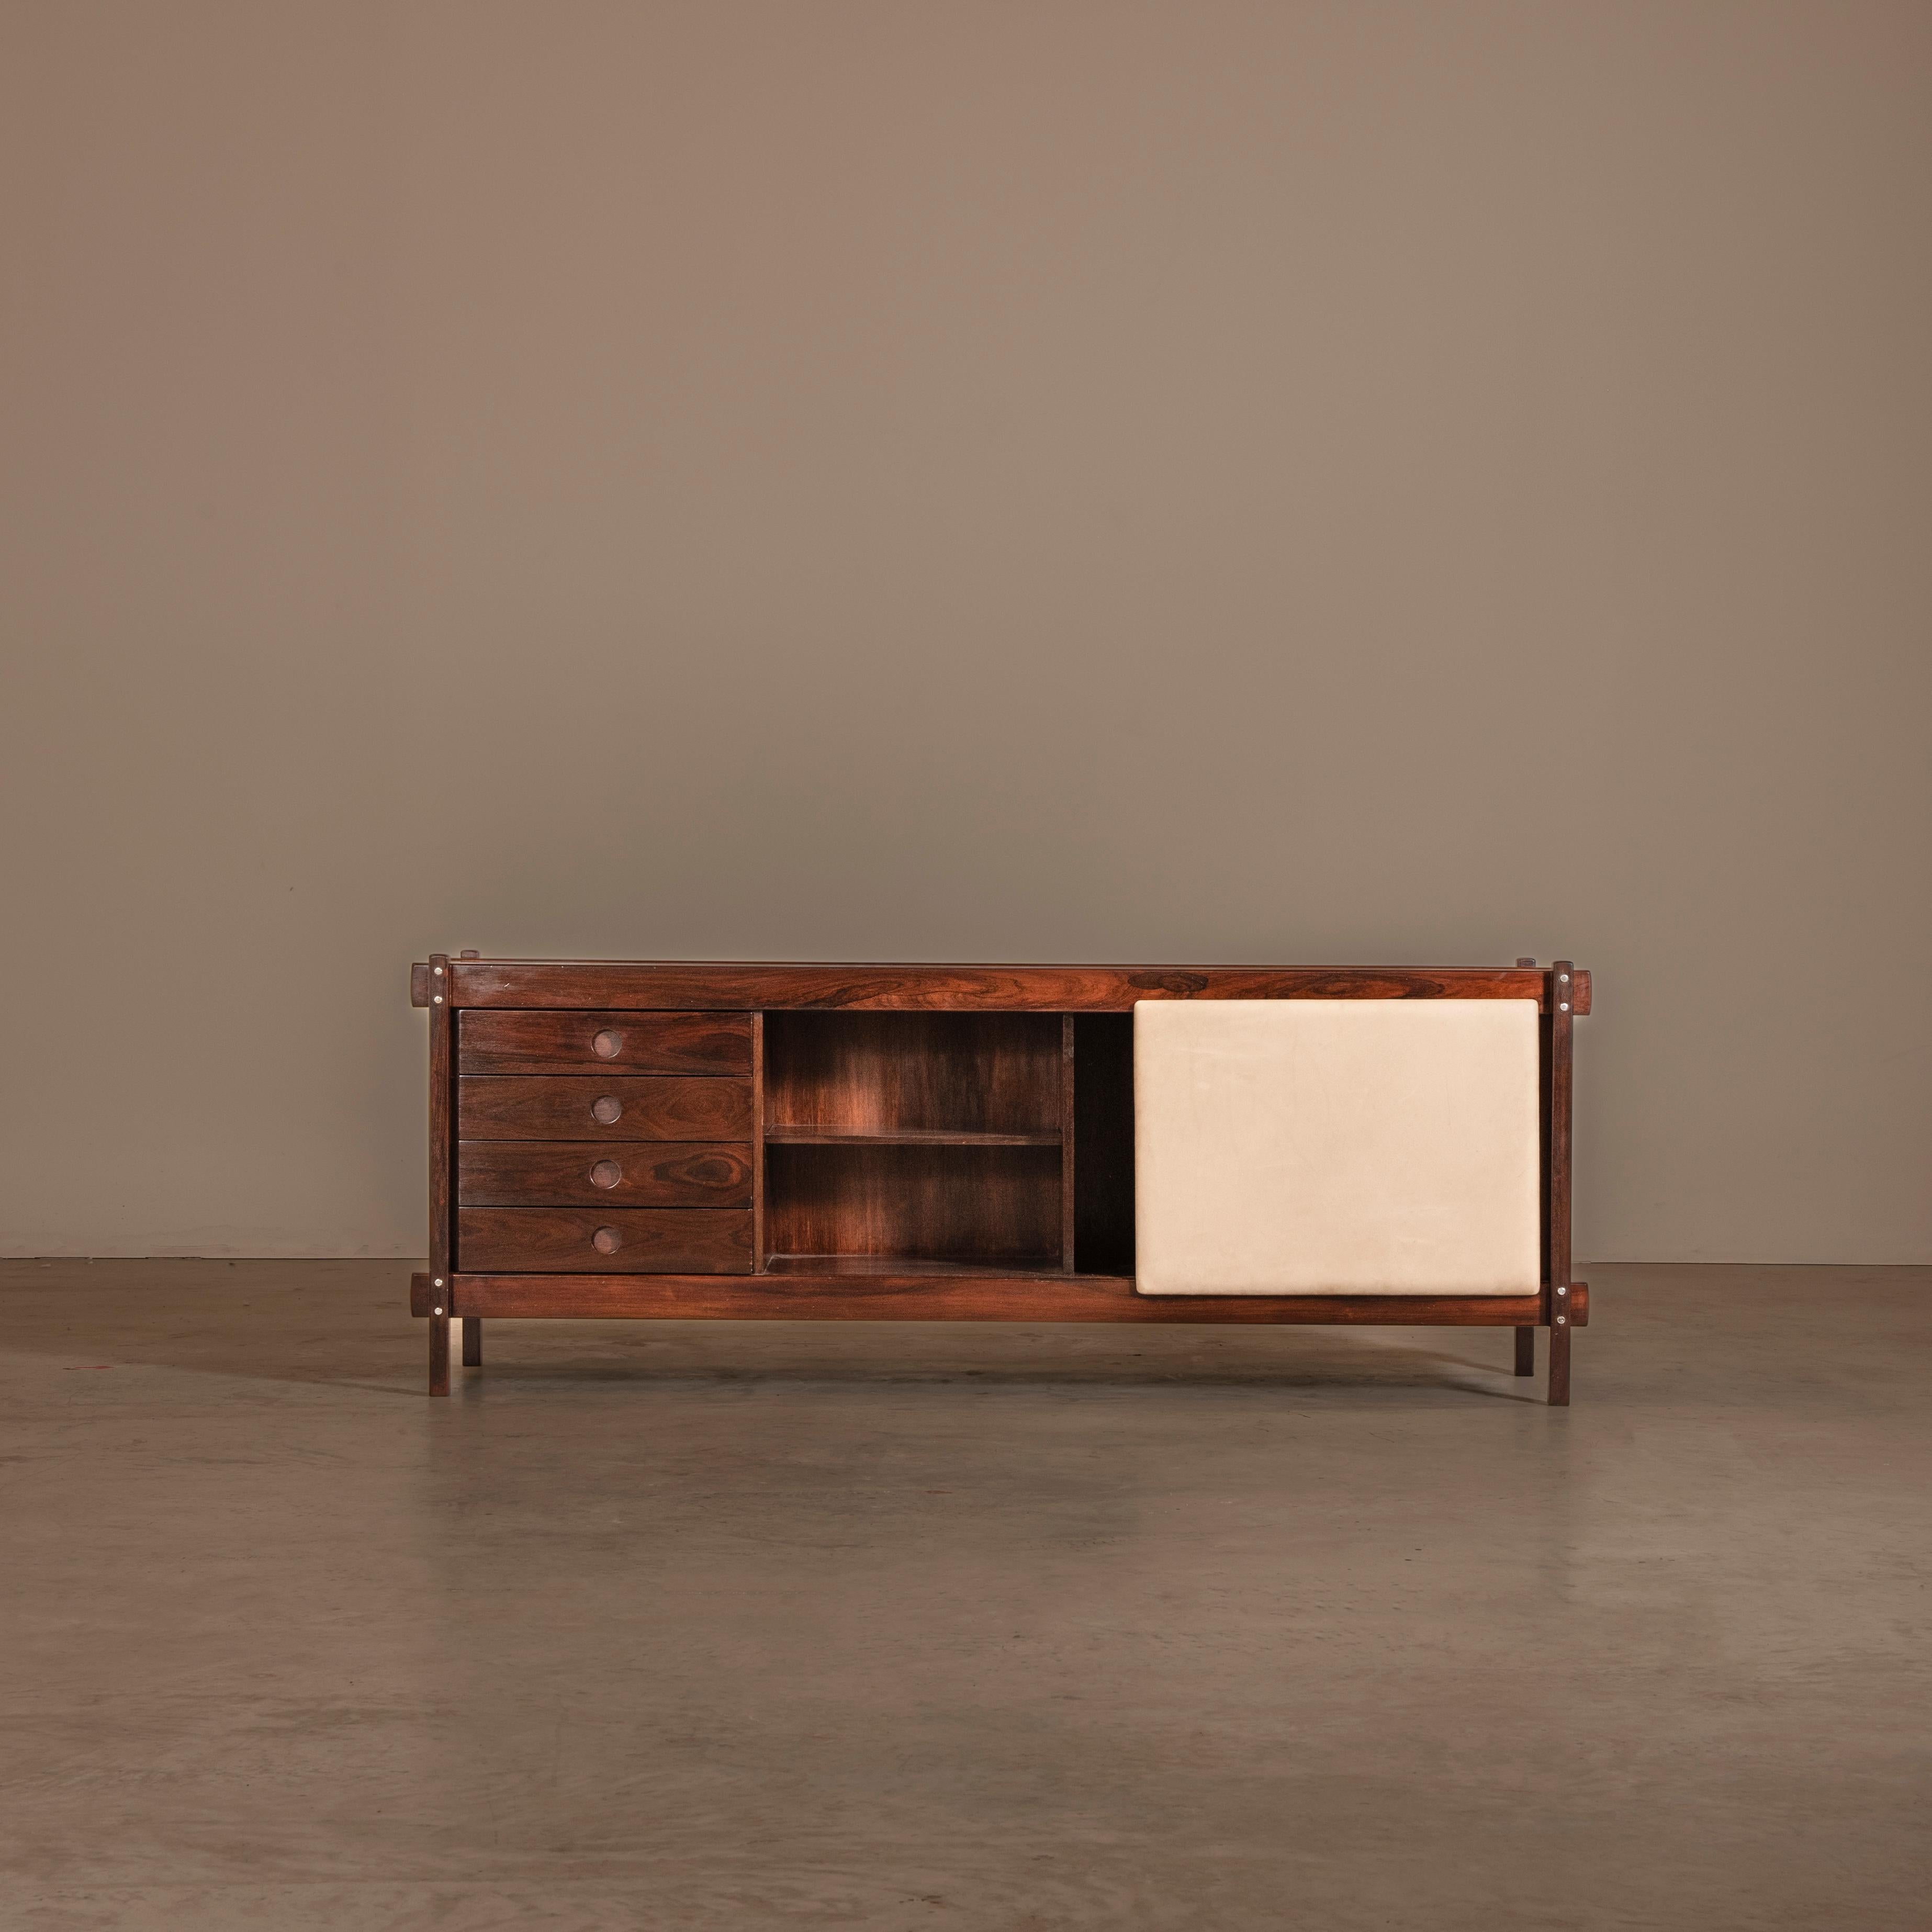 Wood Rare Sideboard, by Sergio Rodrigues, 60s Brazilian Mid-Century Modern